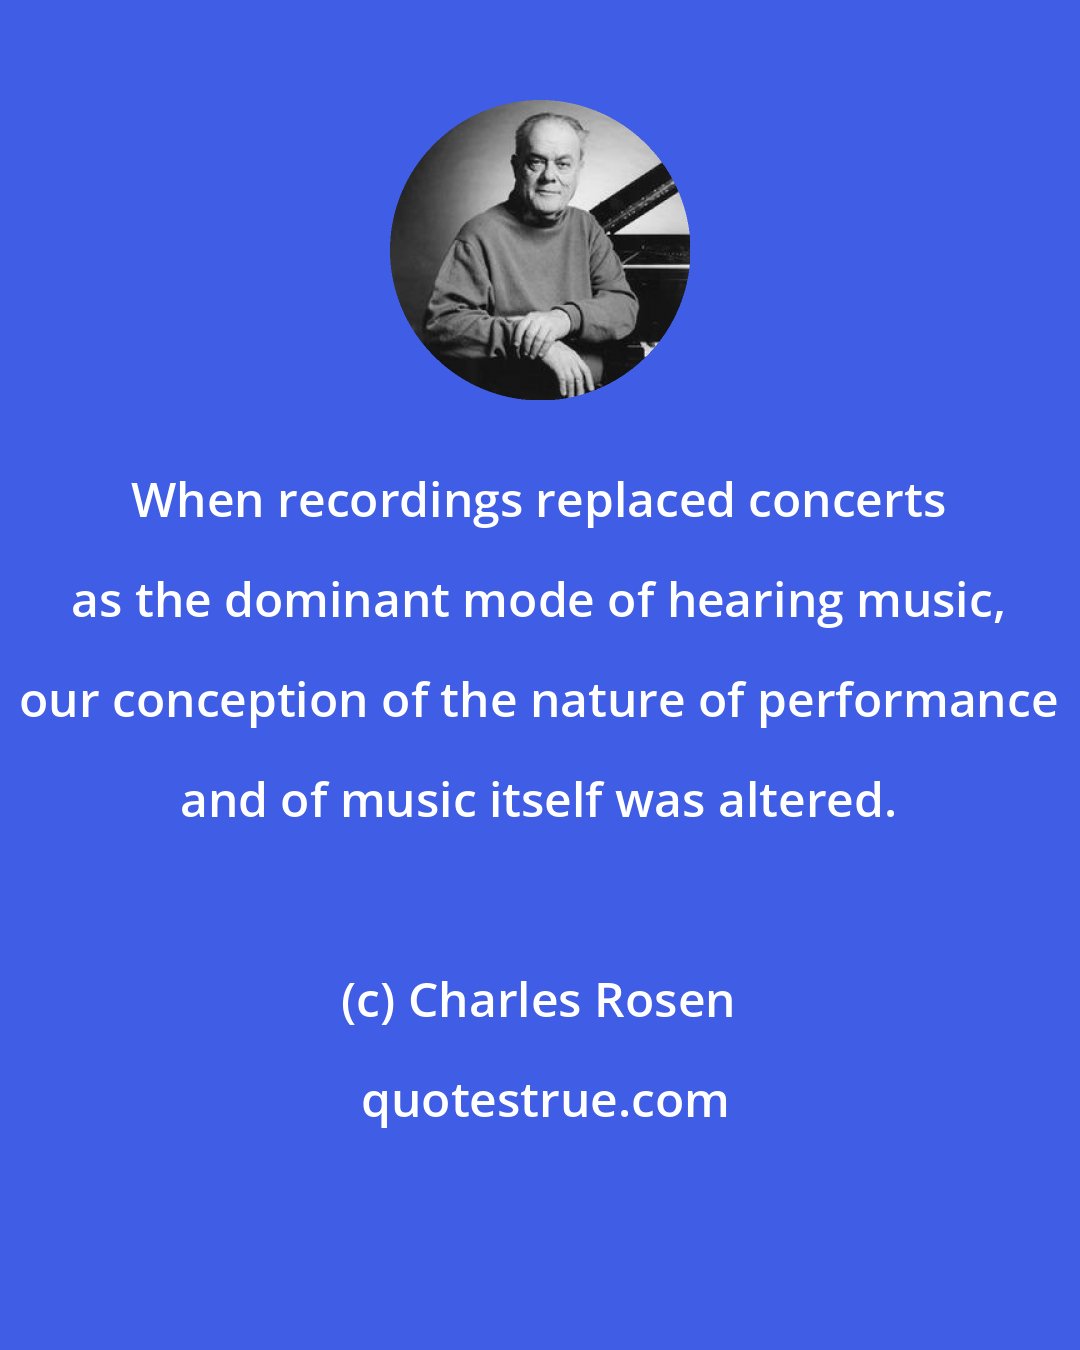 Charles Rosen: When recordings replaced concerts as the dominant mode of hearing music, our conception of the nature of performance and of music itself was altered.